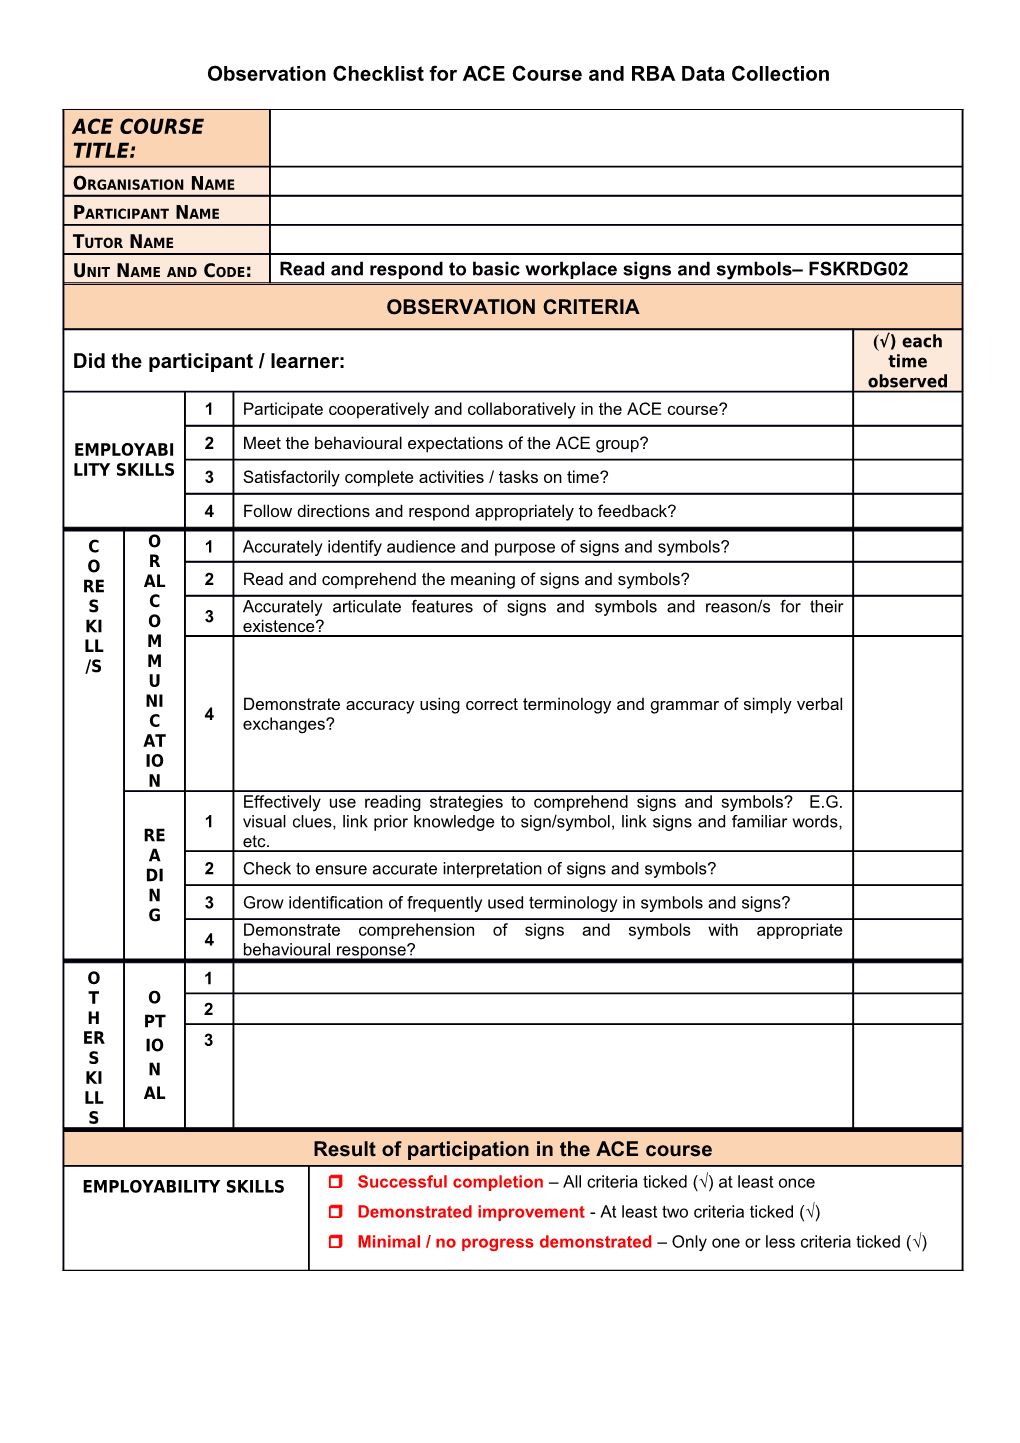 Observation Checklist for ACE Course and RBA Data Collection